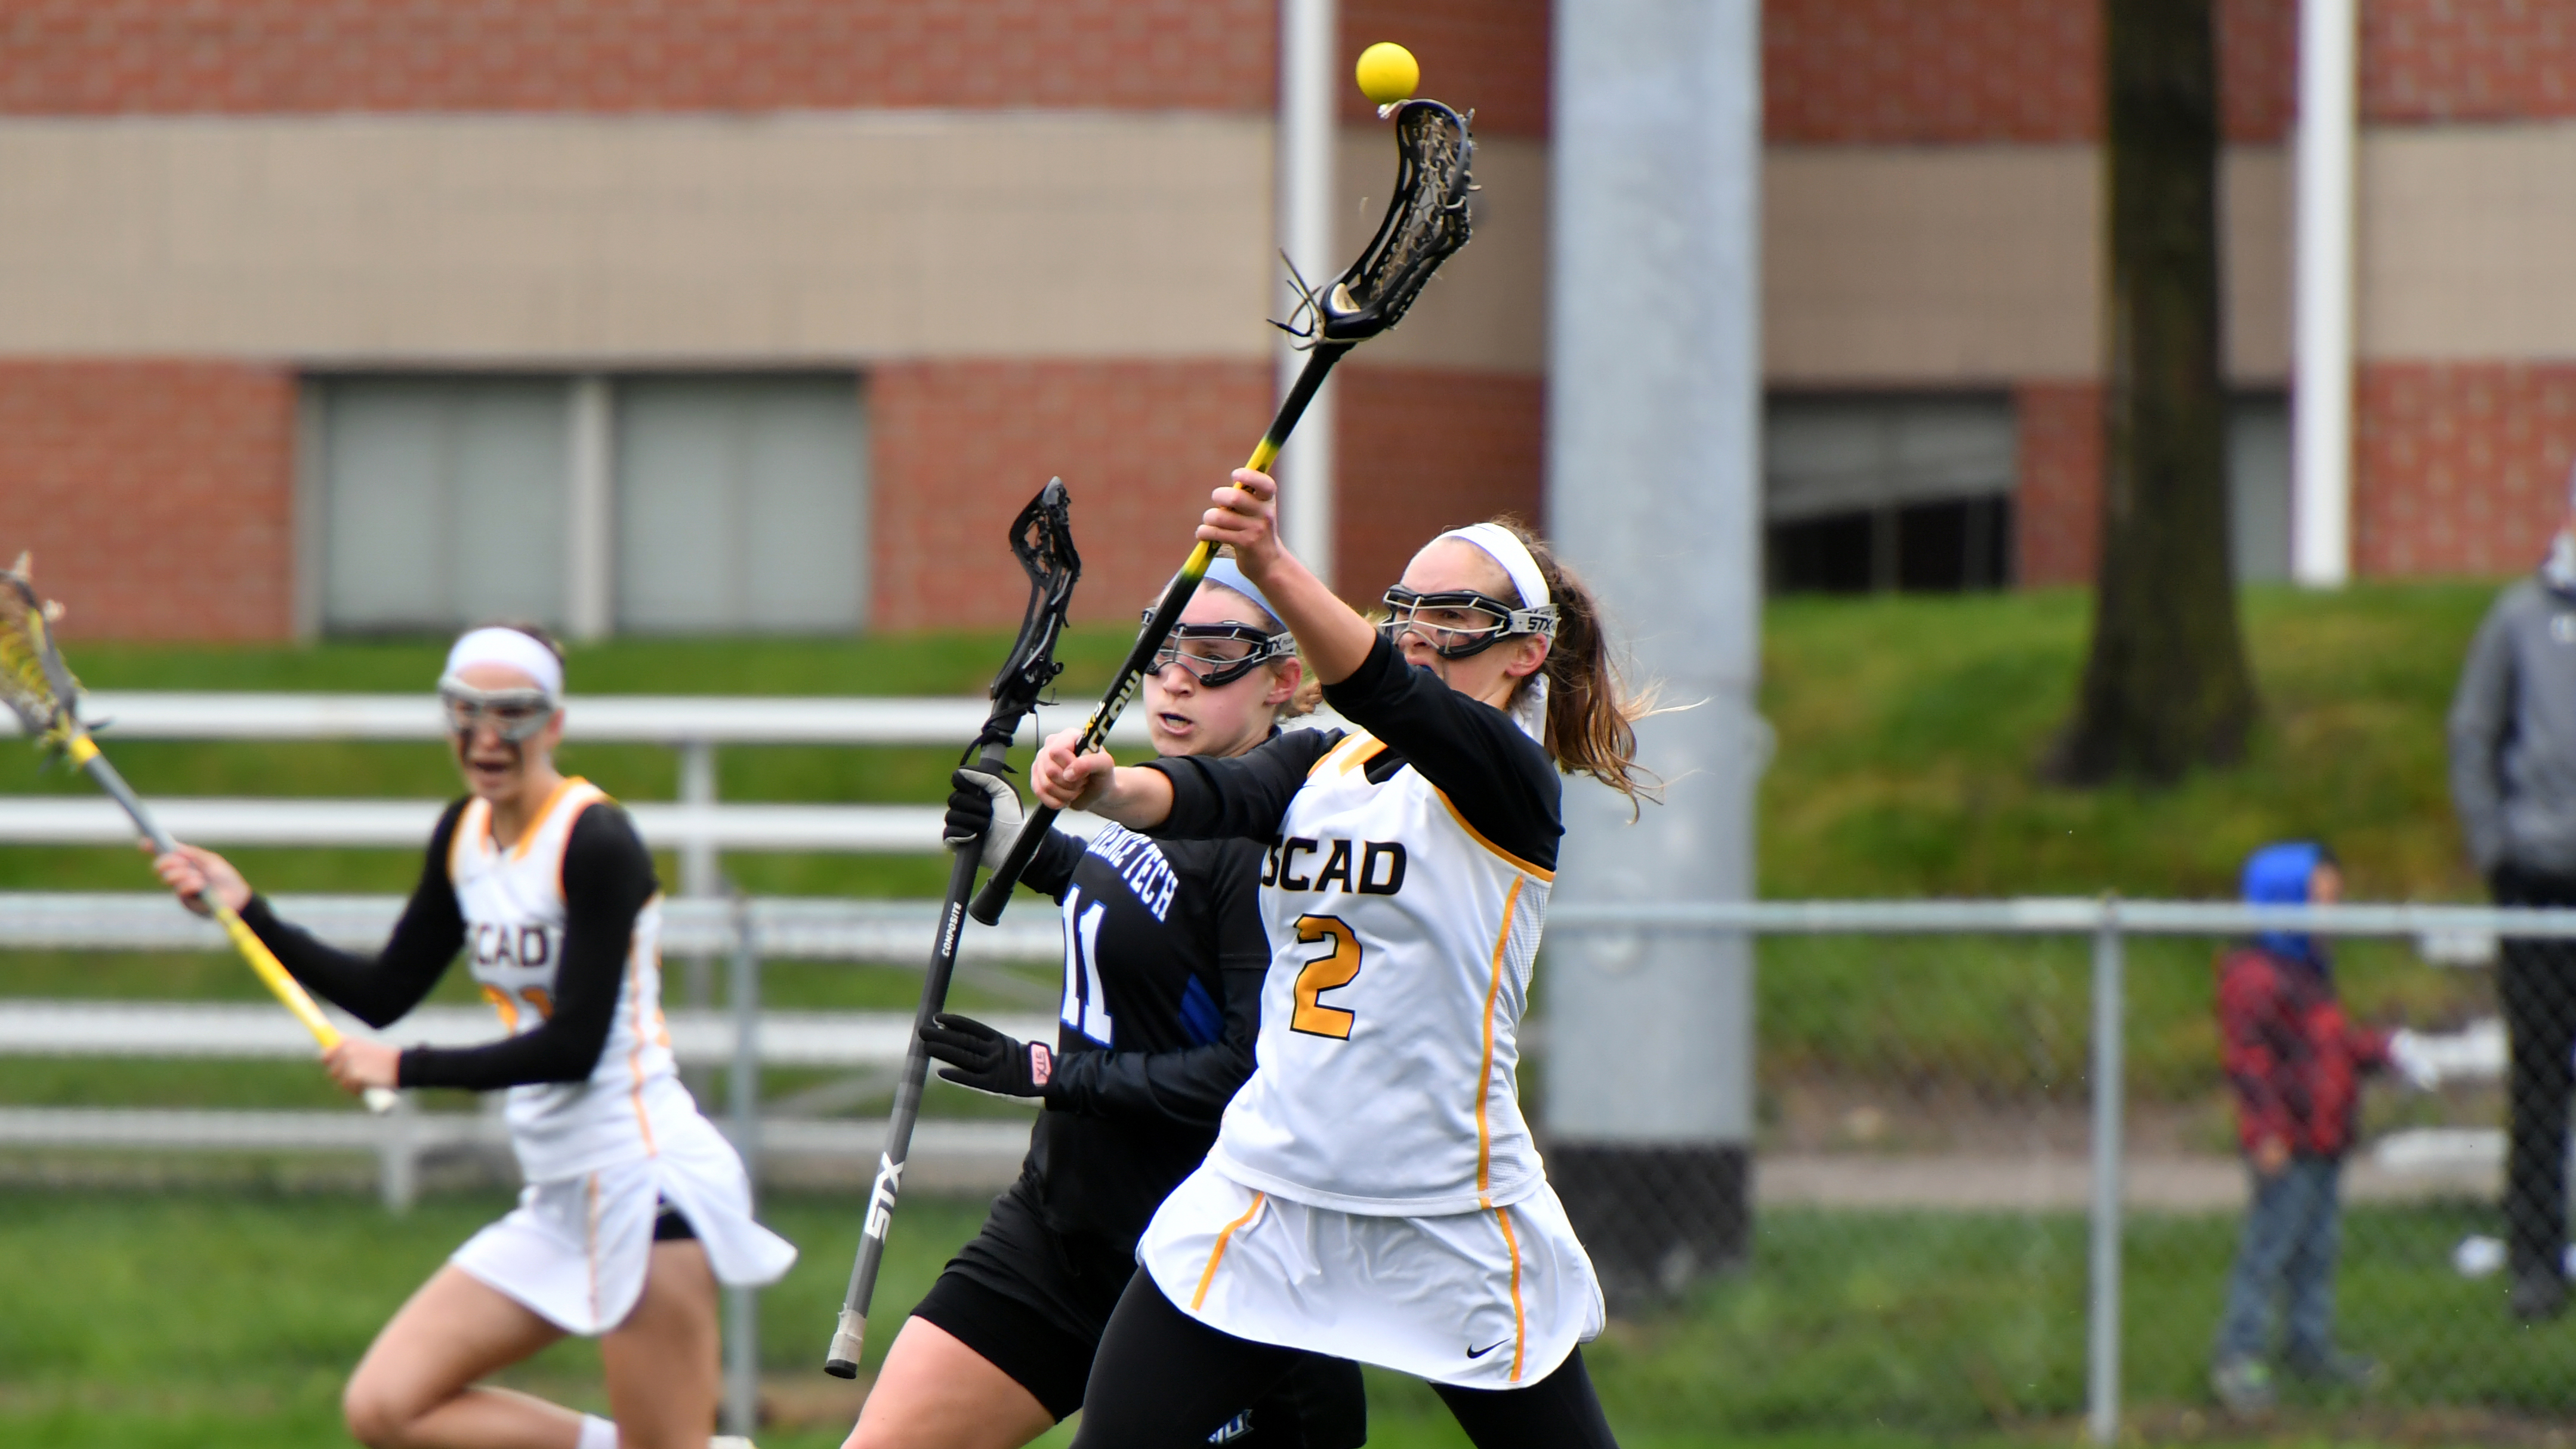 Qualifiers for the 2019 NAIA Women's Lacrosse Invitational Announced